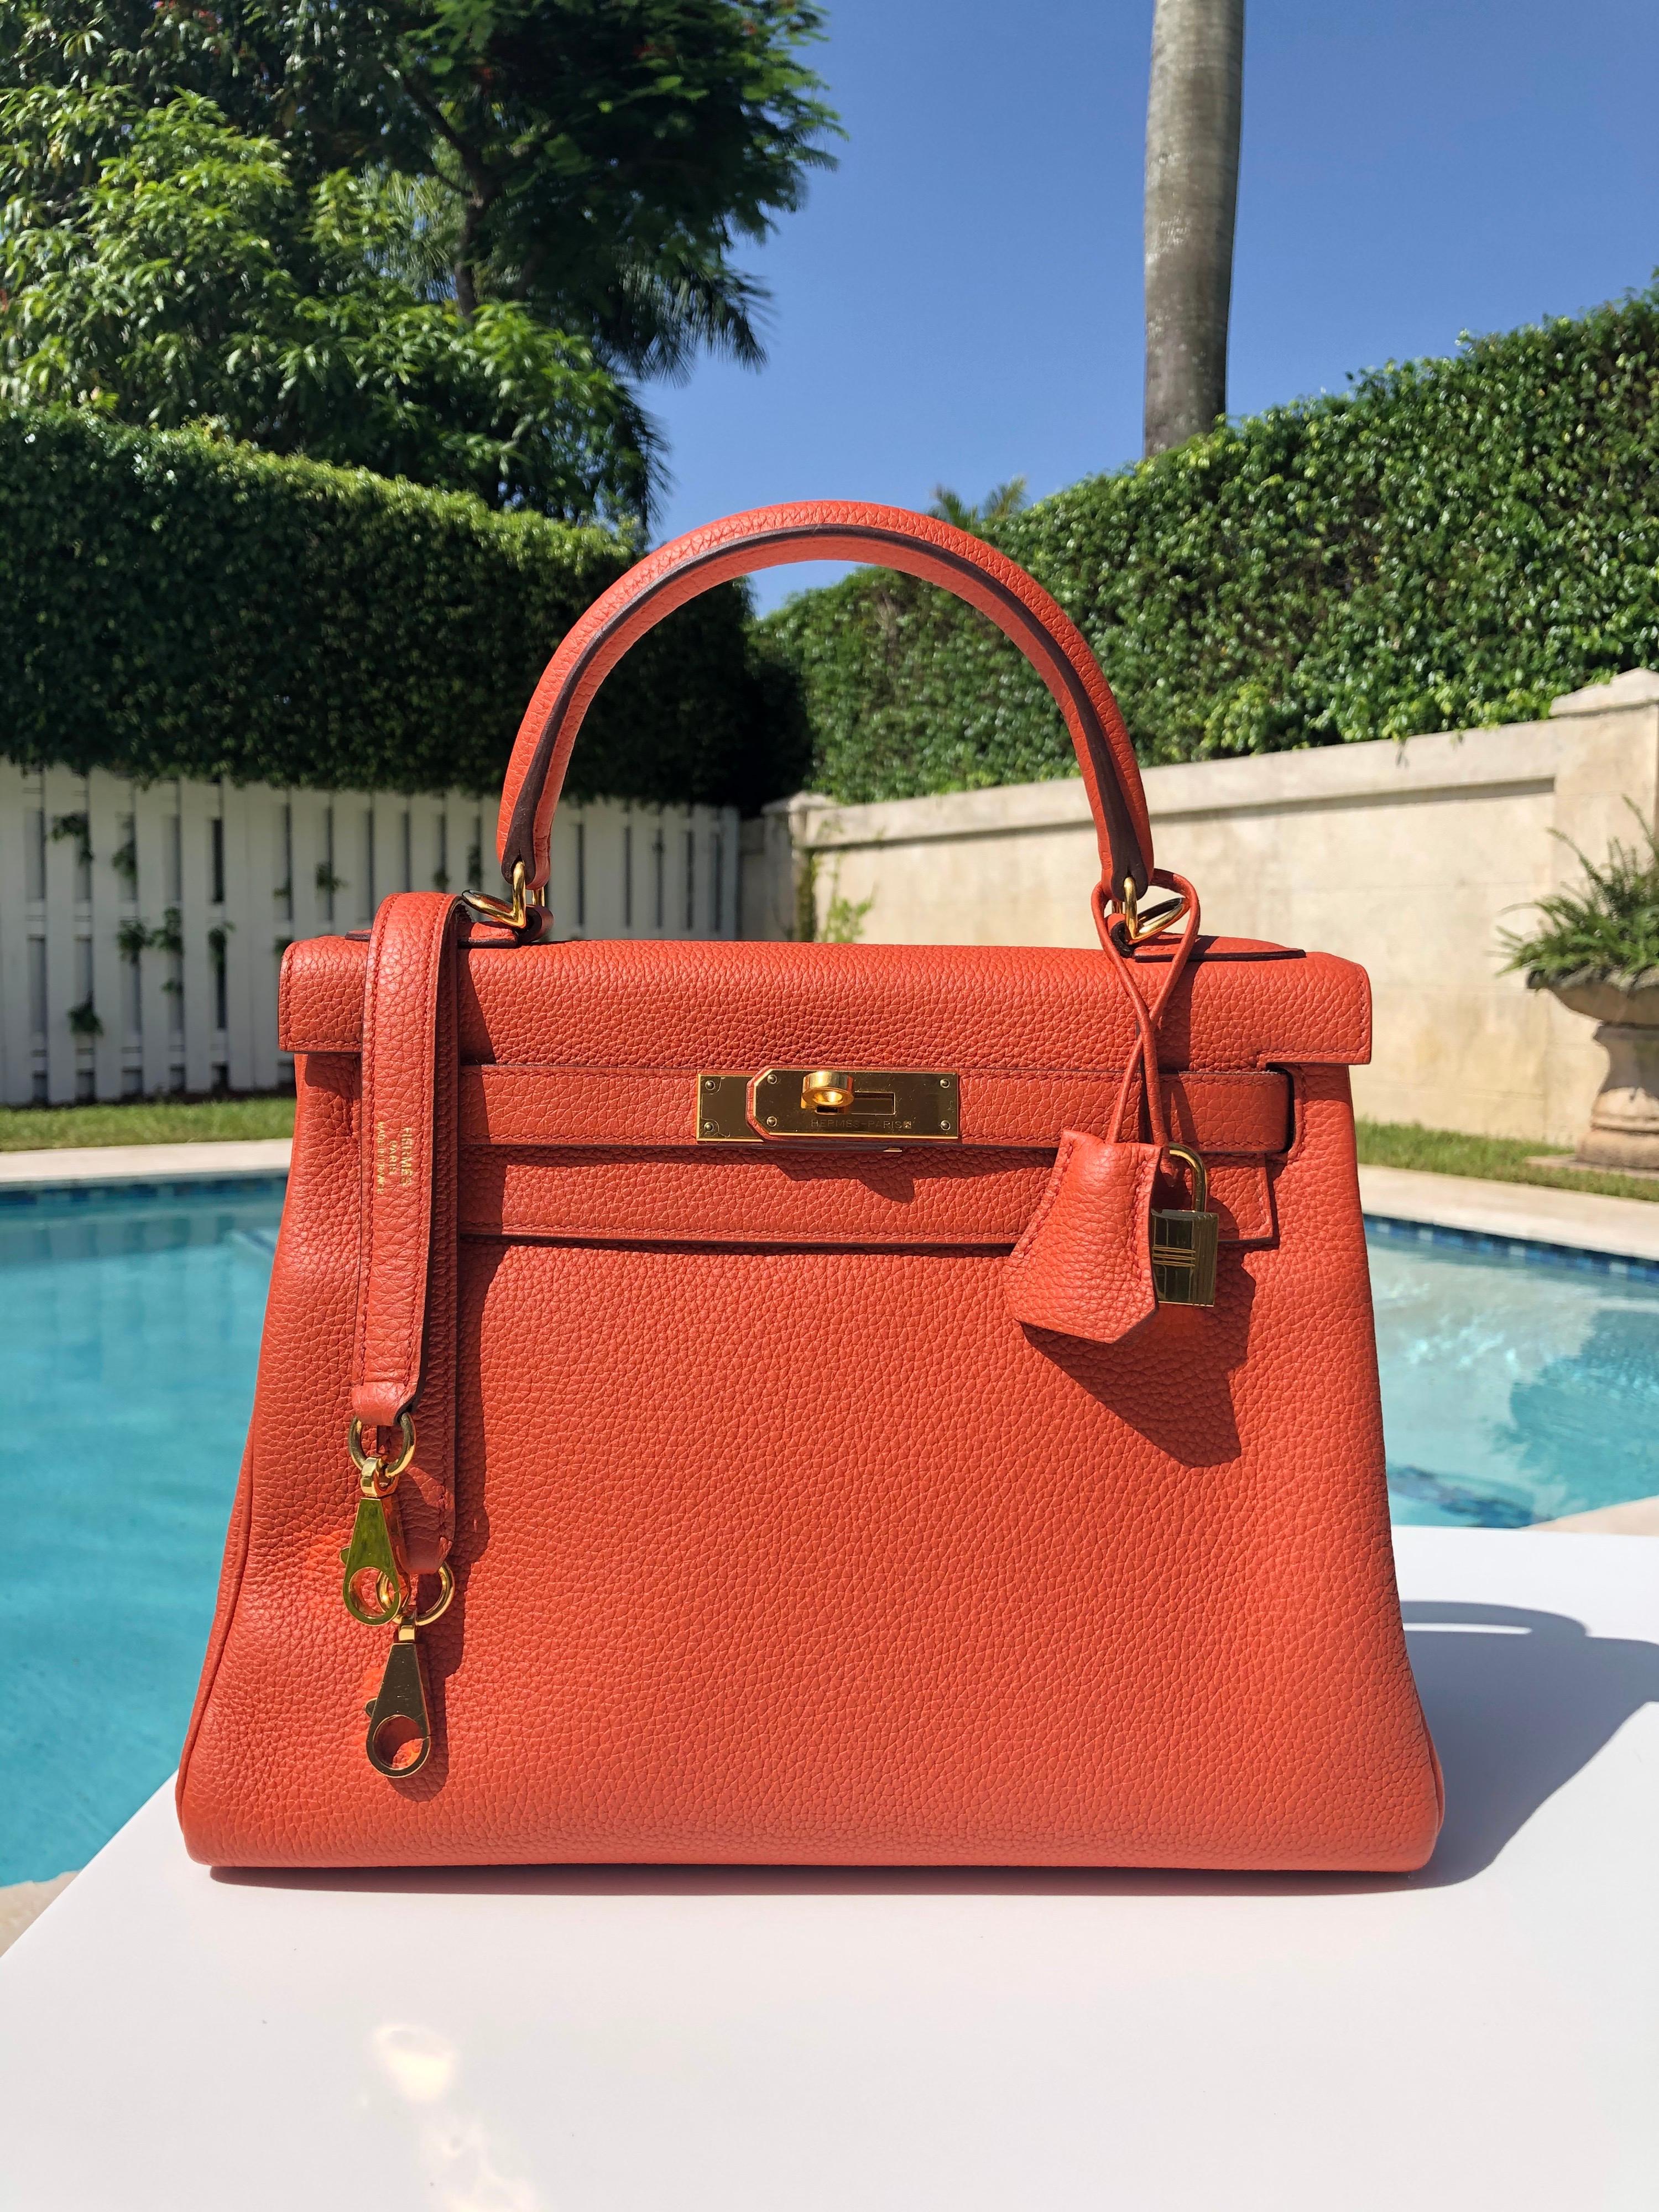 HERMES KELLY 28 Feu Fire Orange GOLD HARDWARE X STAMP 2016. Excellent Pristine Condition, plastic on plates except Hermès engraving plate. Perfect corners and excellent structure. No odors or stains.

Shop with confidence from Lux Addicts.